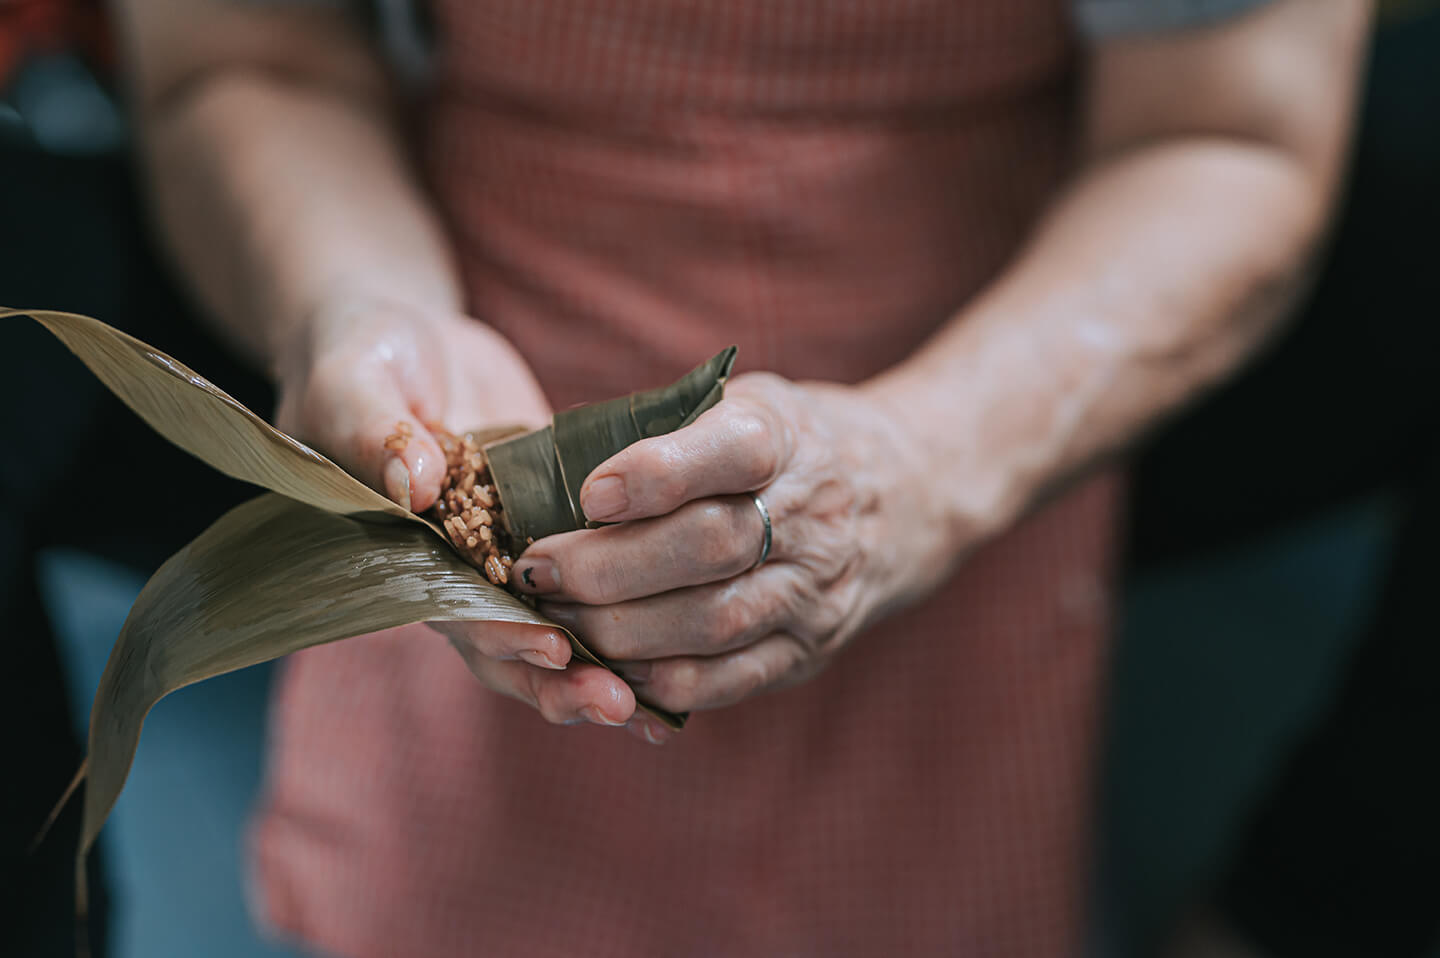 Expert hands gently wrapping rice in bamboo leaves.